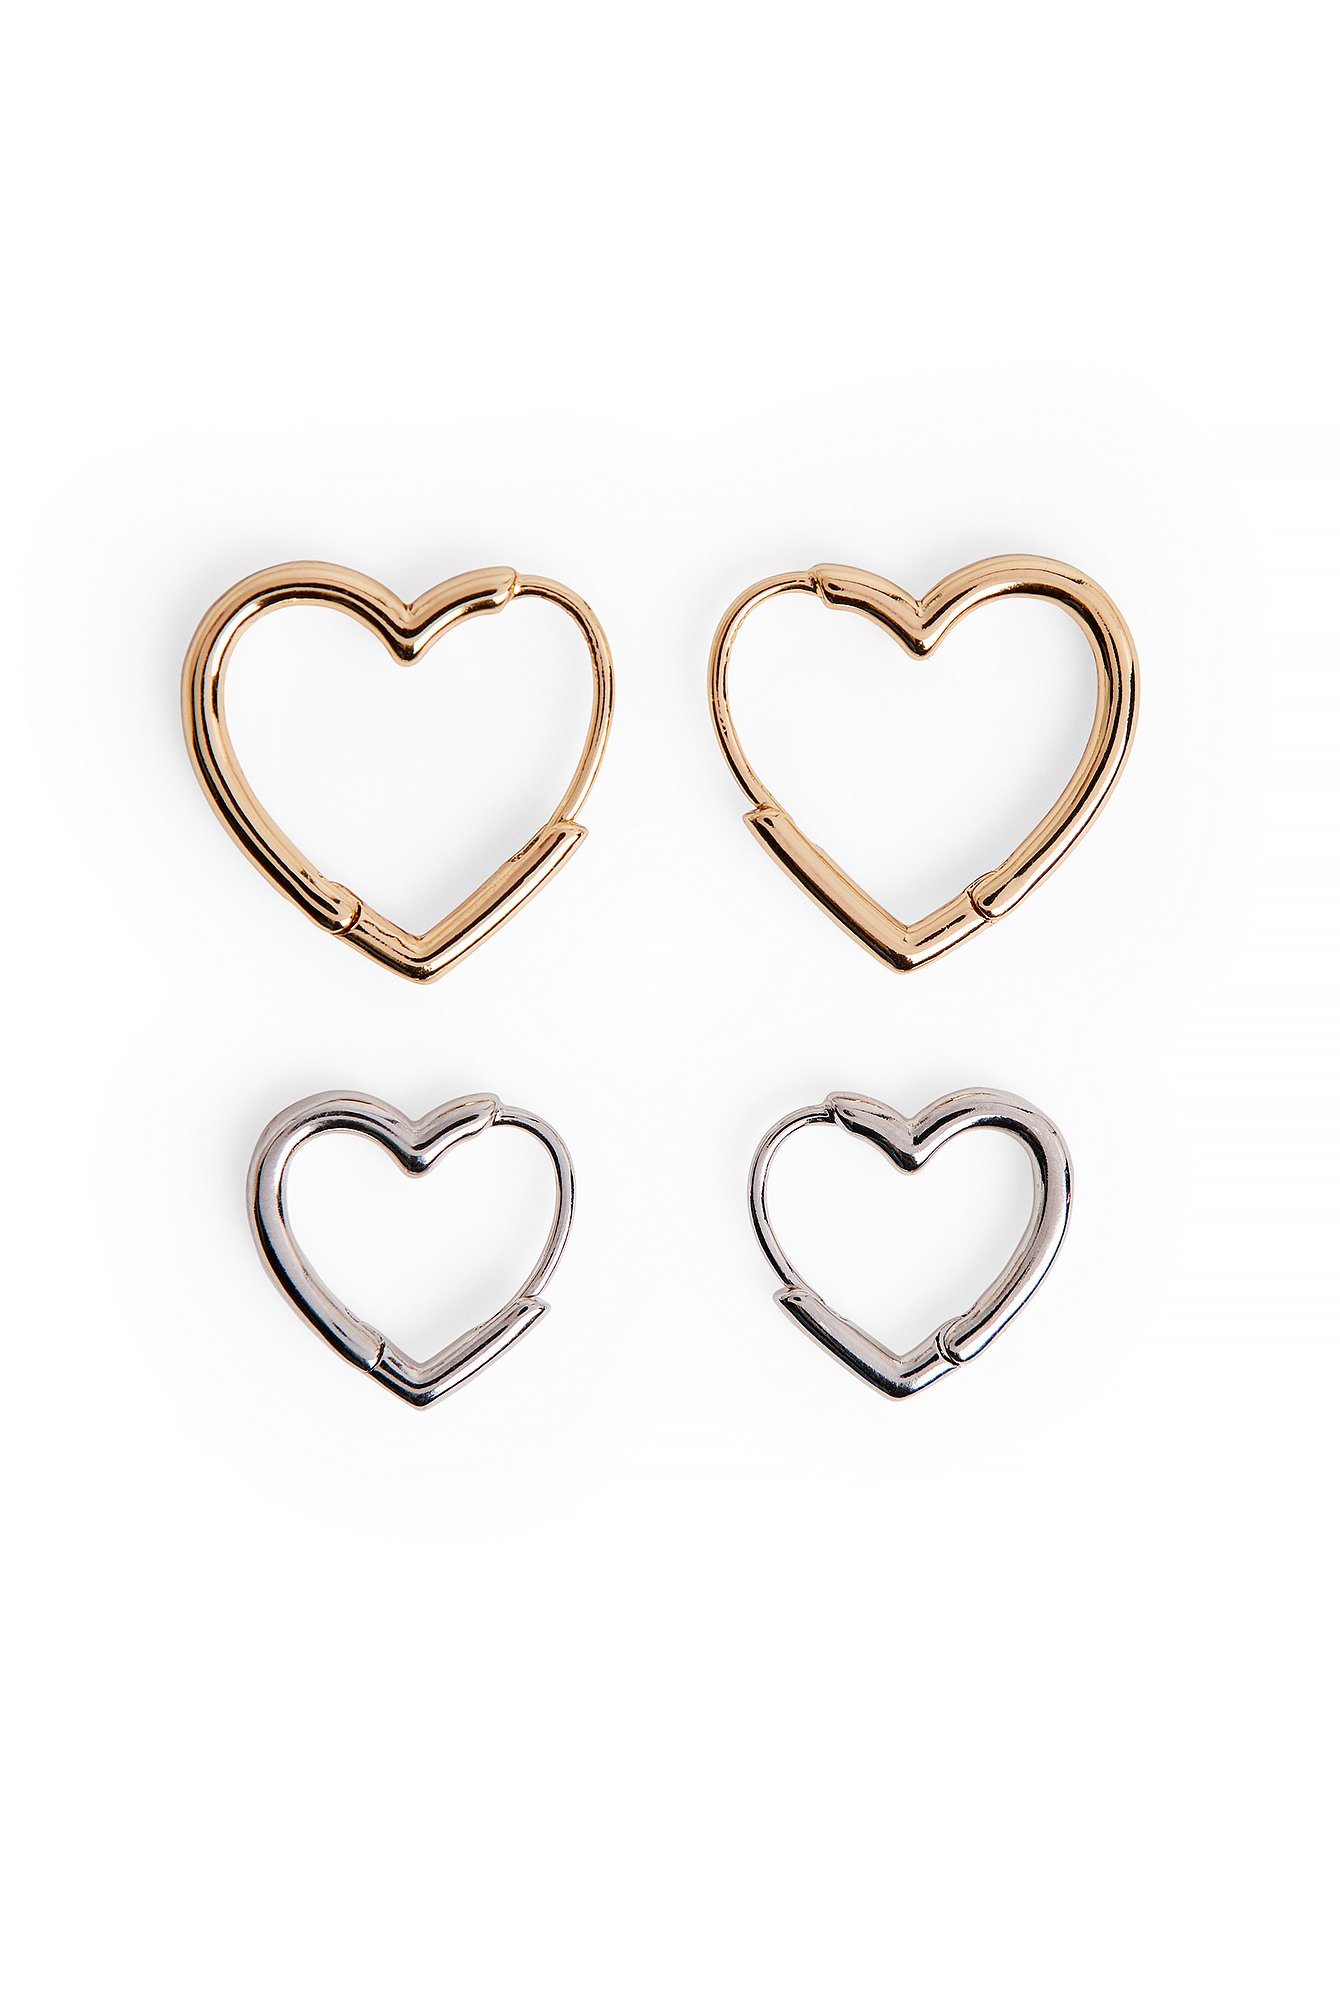 Silver/Gold 2-pack Small Heart Hoops